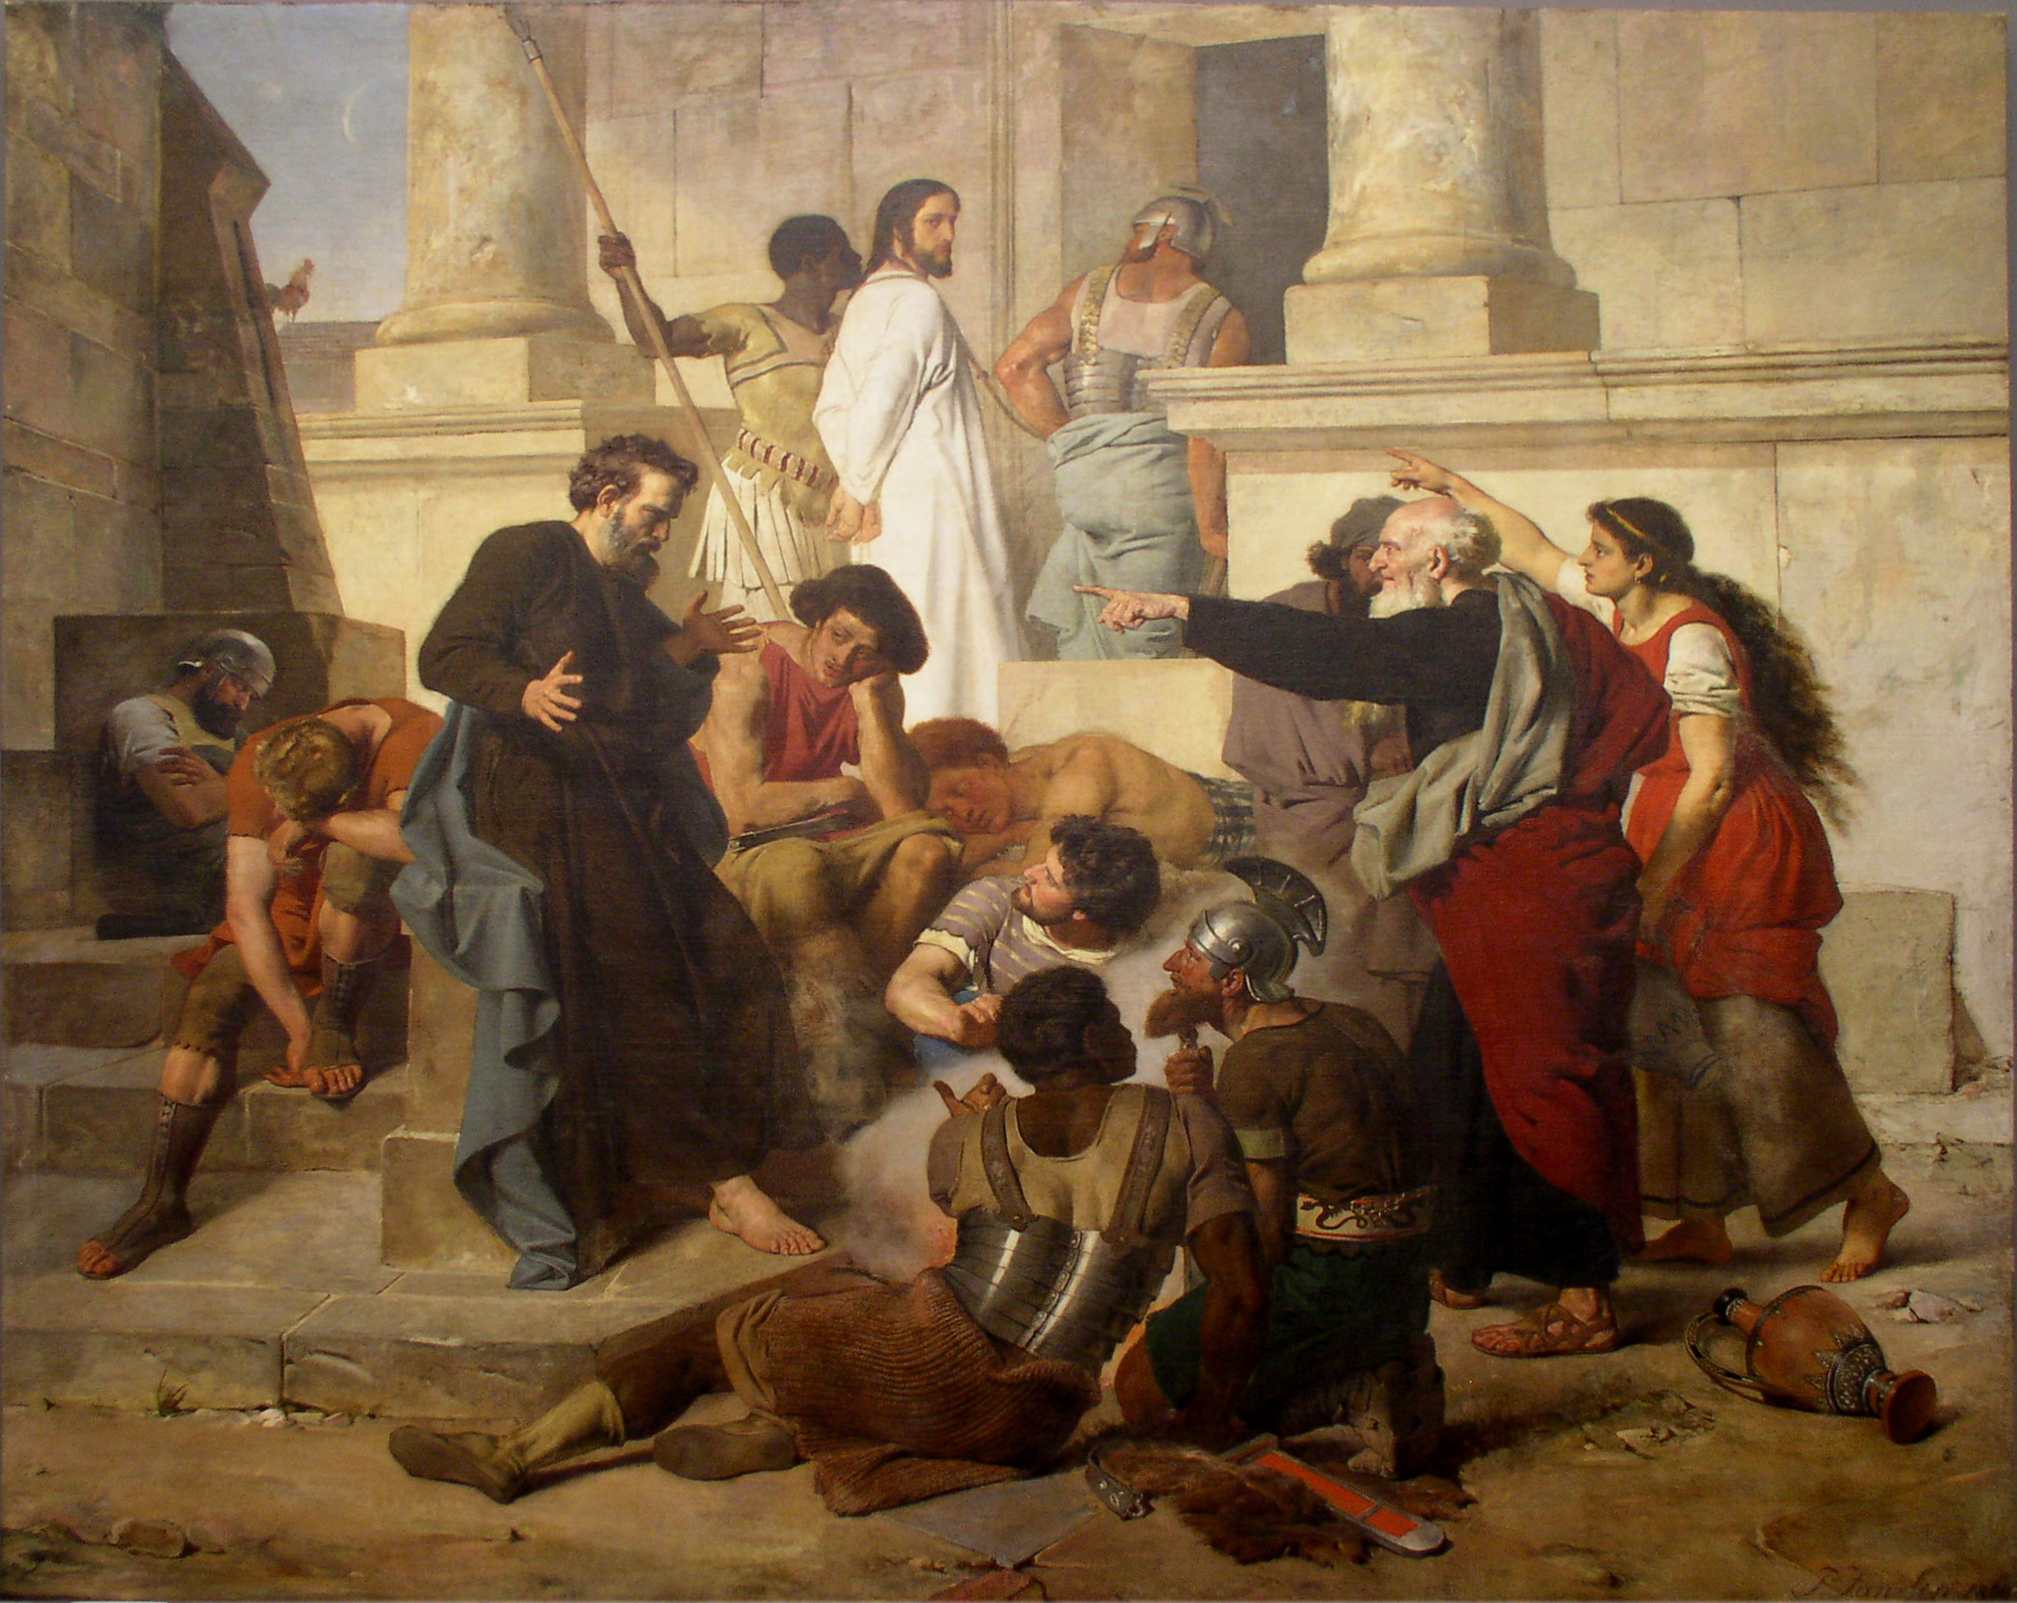 Peter Denying Christ - Painting by Peter Janssen, 1869, click to enlarge